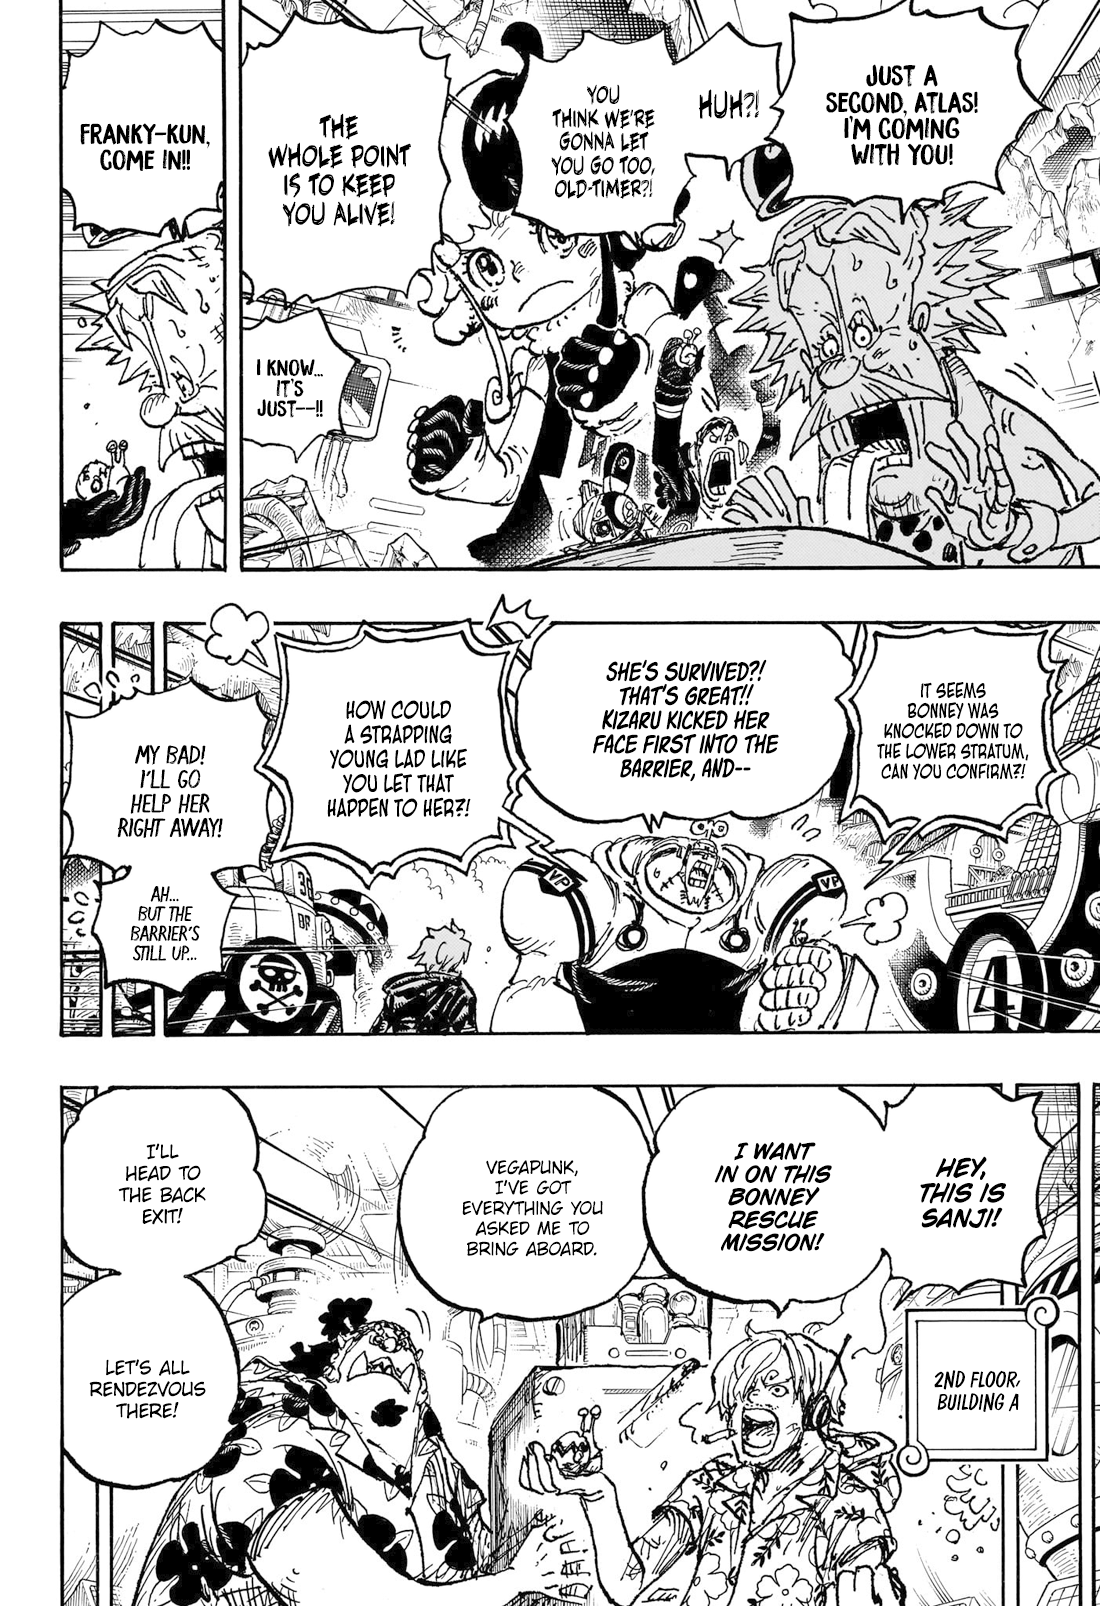 Spoiler - One Piece Chapter 1065 Spoilers Discussion, Page 341